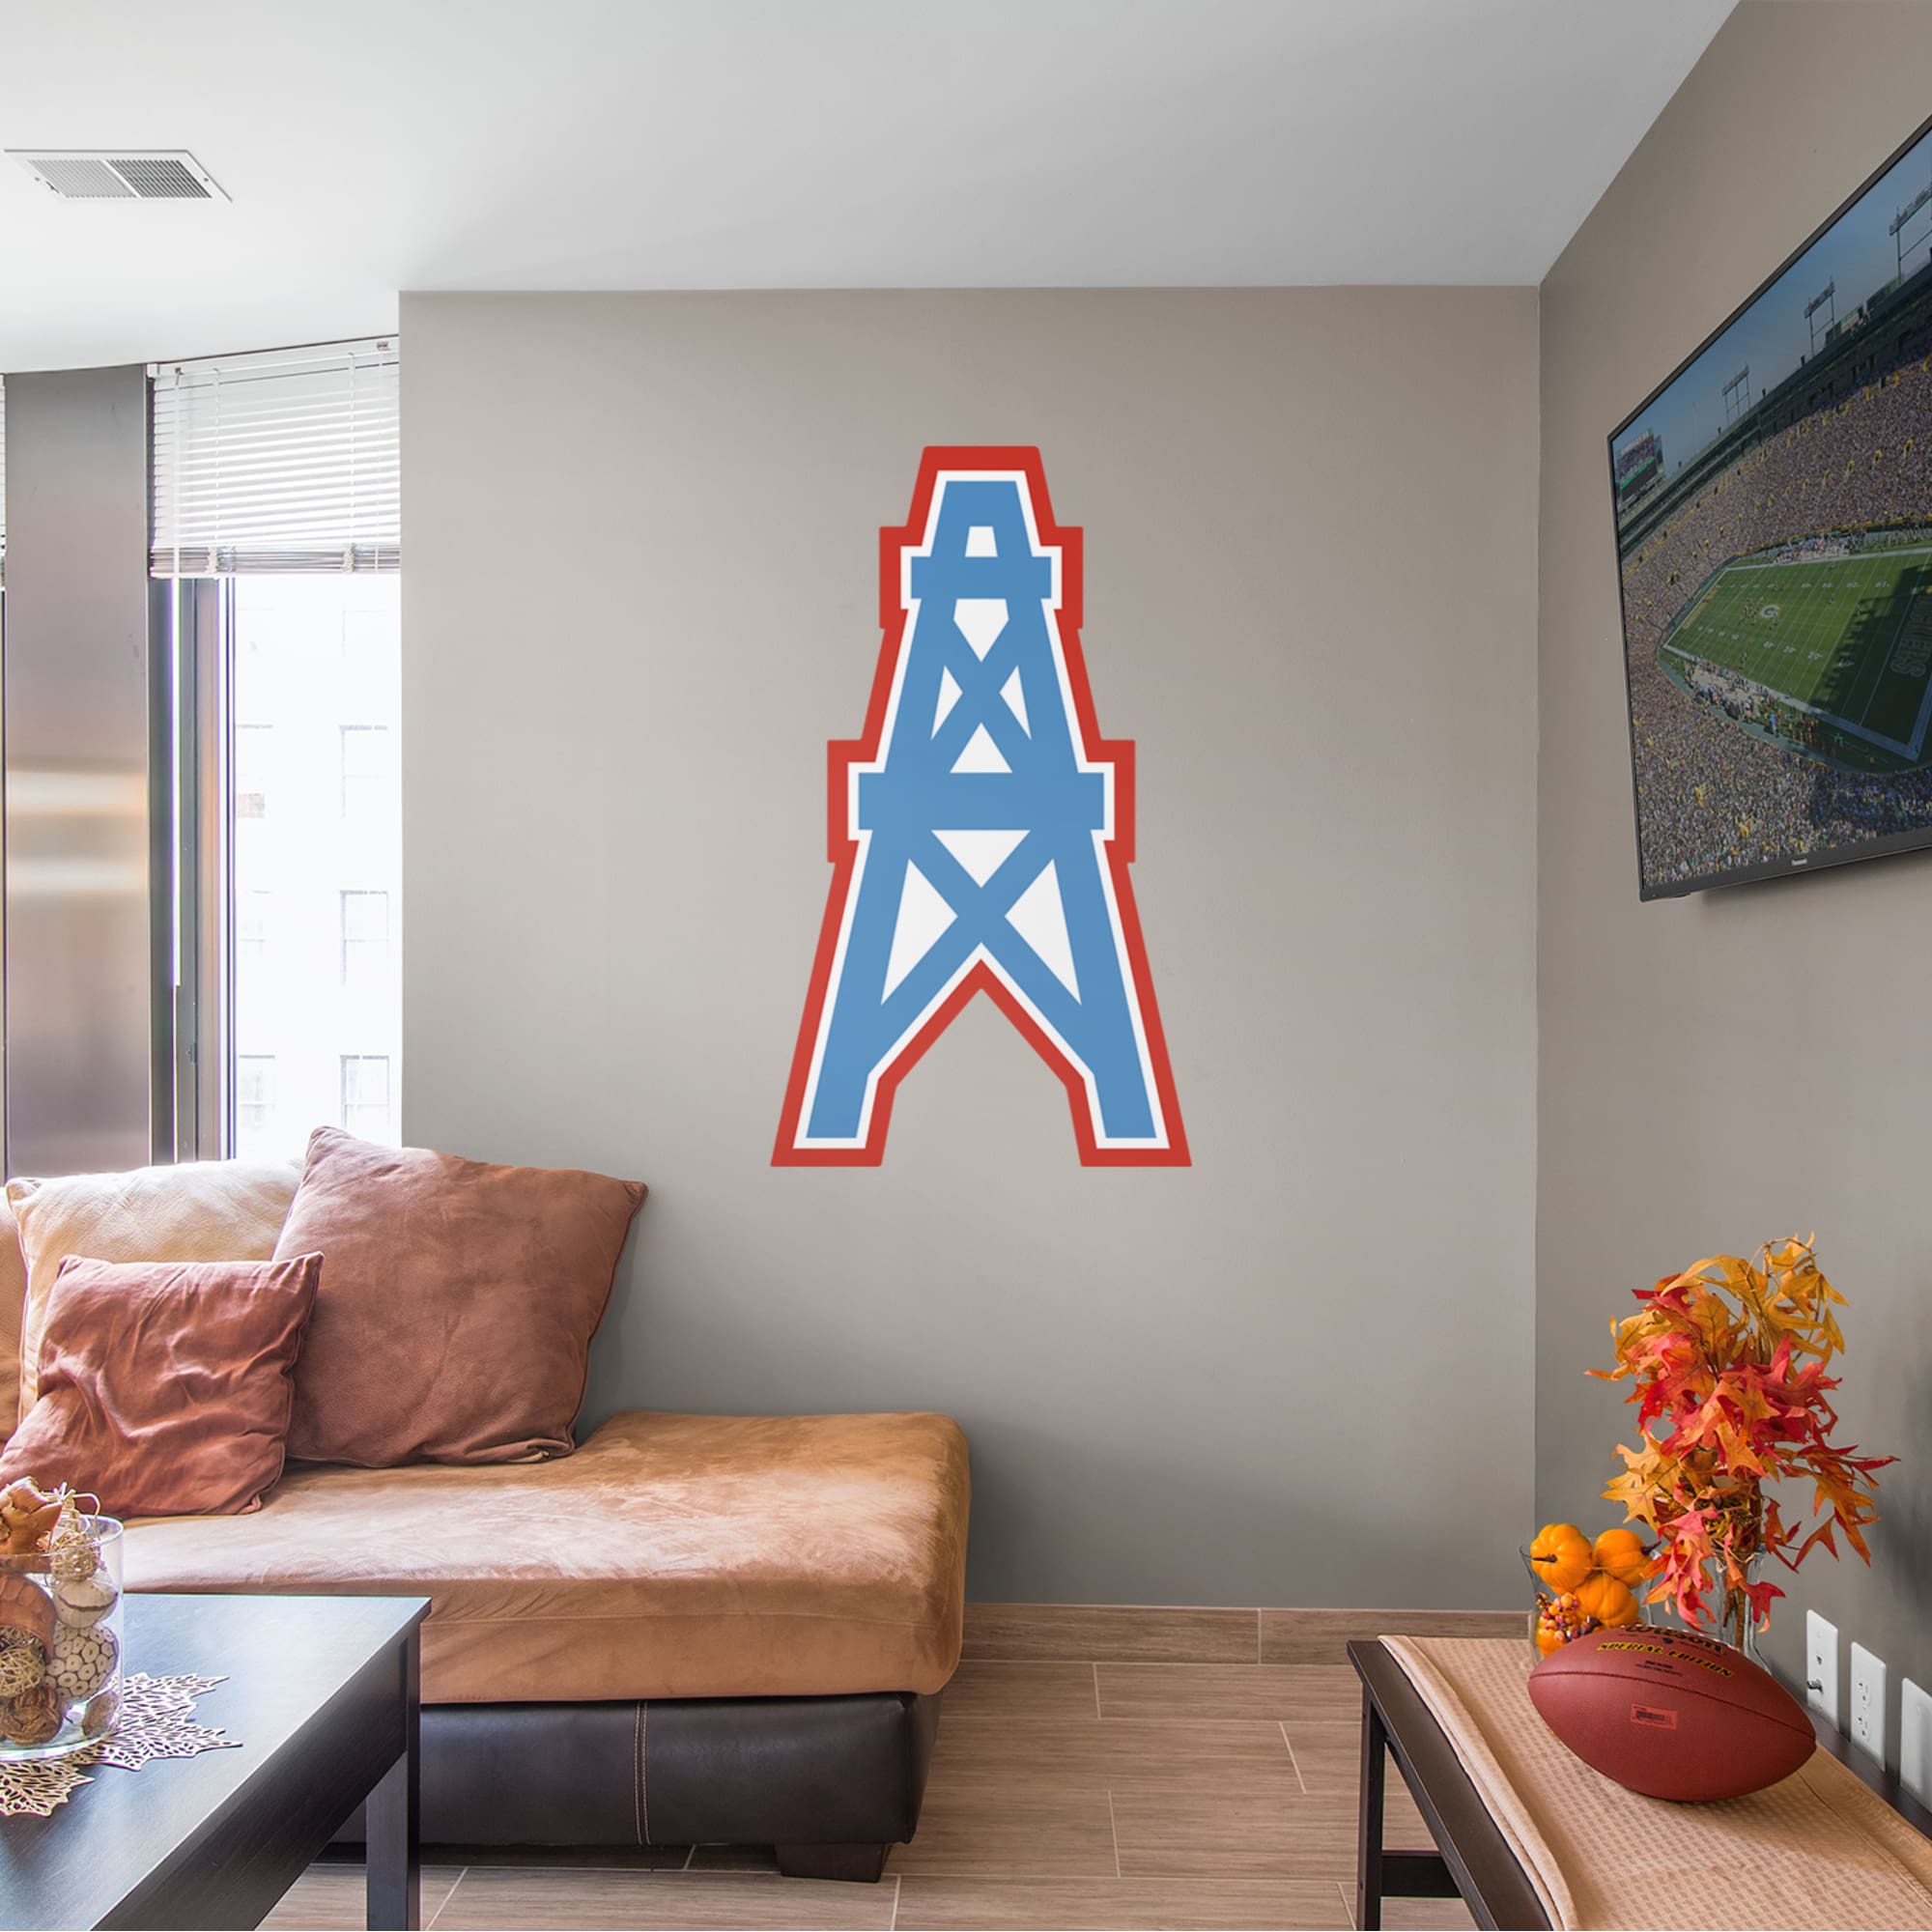 Houston Oilers for Tennessee Titans: Original AFL Logo - Officially Licensed NFL Removable Wall Decal 30.0"W x 51.0"H by Fathead